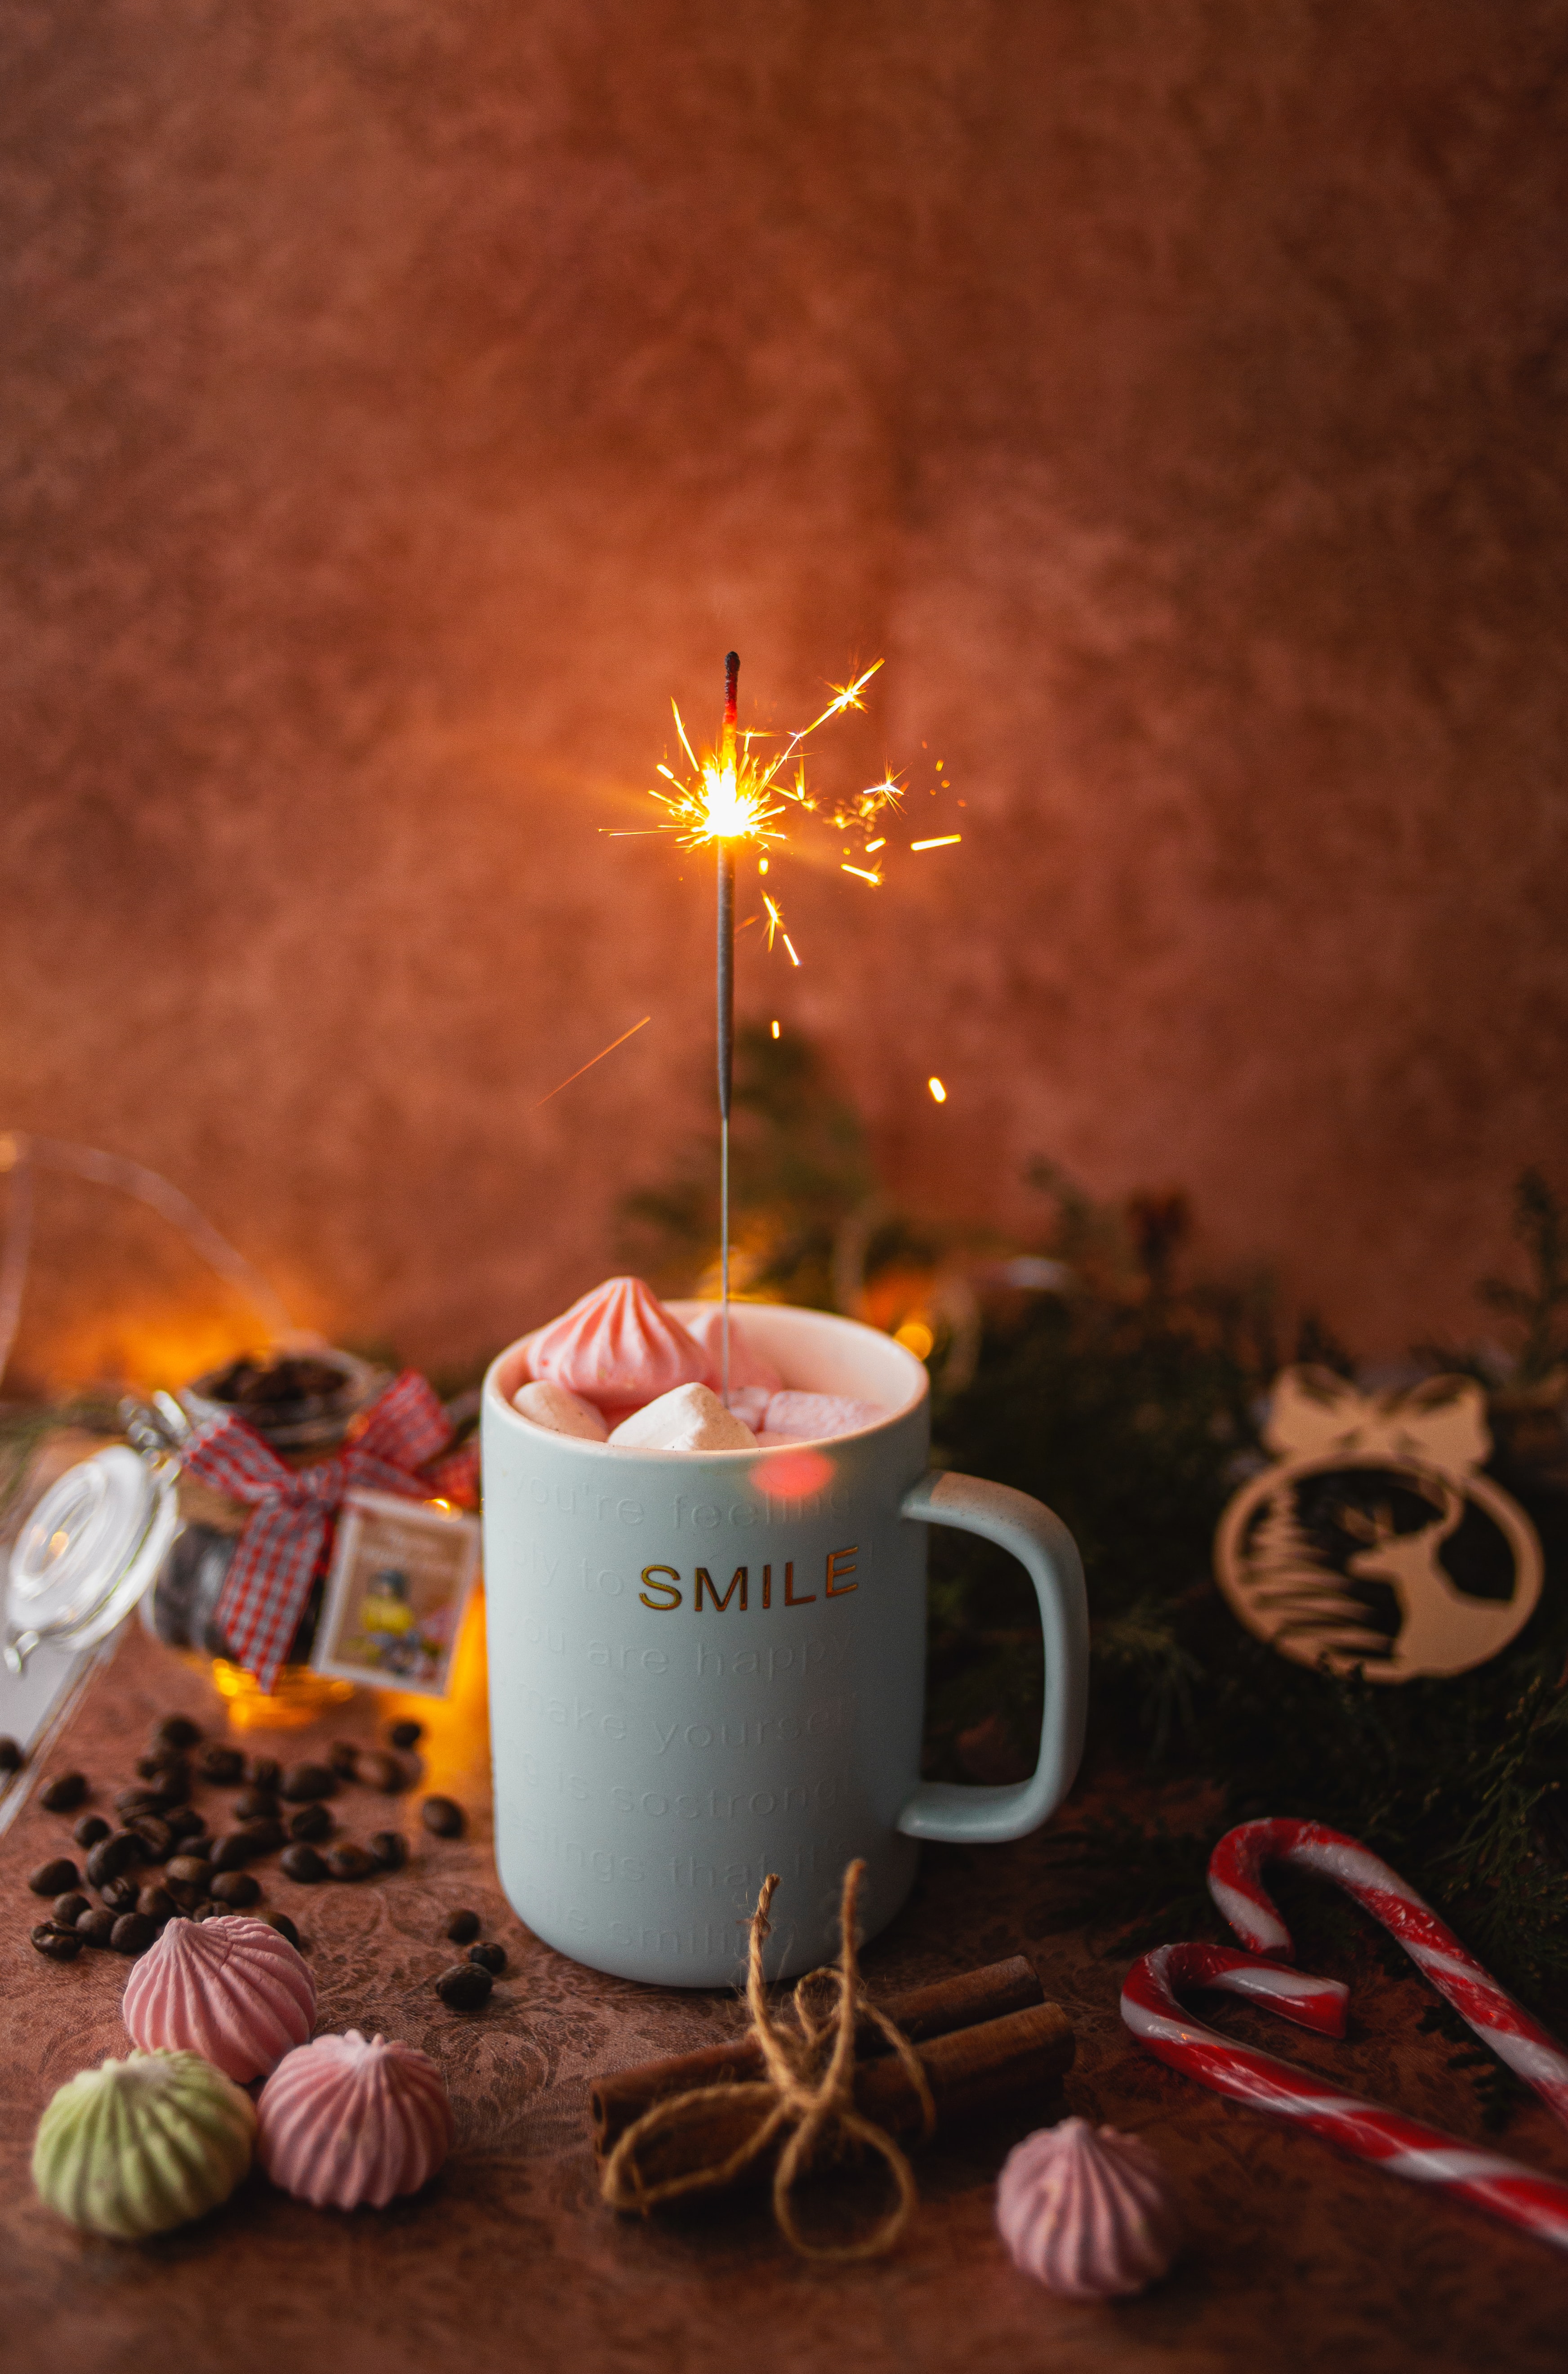 miscellanea, mug, holiday, sparks, cup, miscellaneous, marshmallow, bengal lights, sparklers, zephyr phone wallpaper